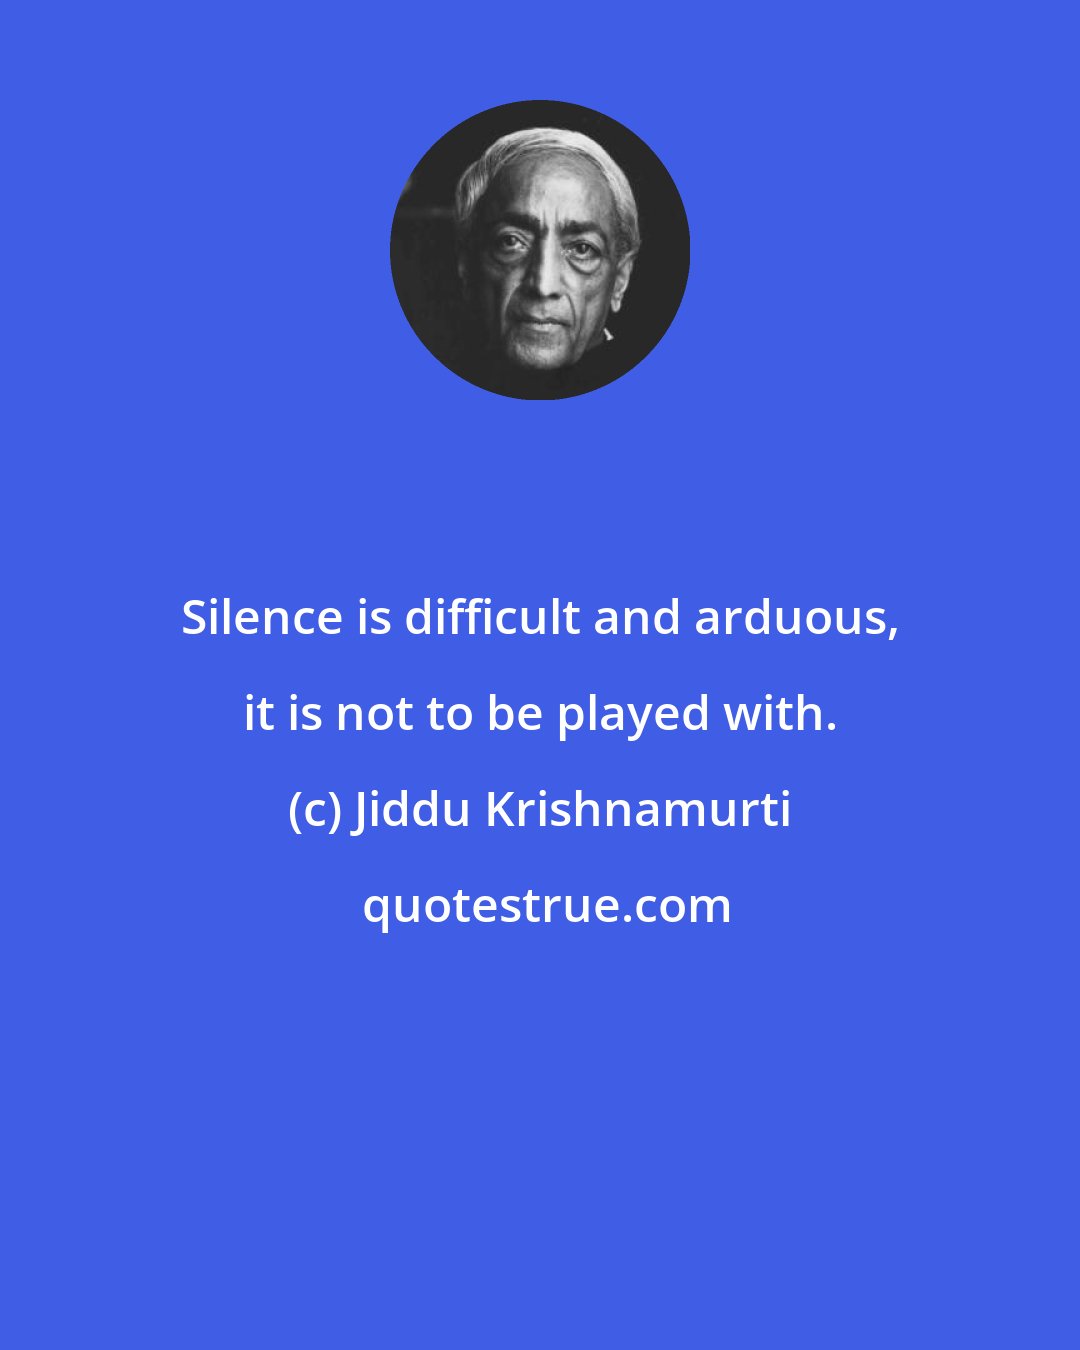 Jiddu Krishnamurti: Silence is difficult and arduous, it is not to be played with.